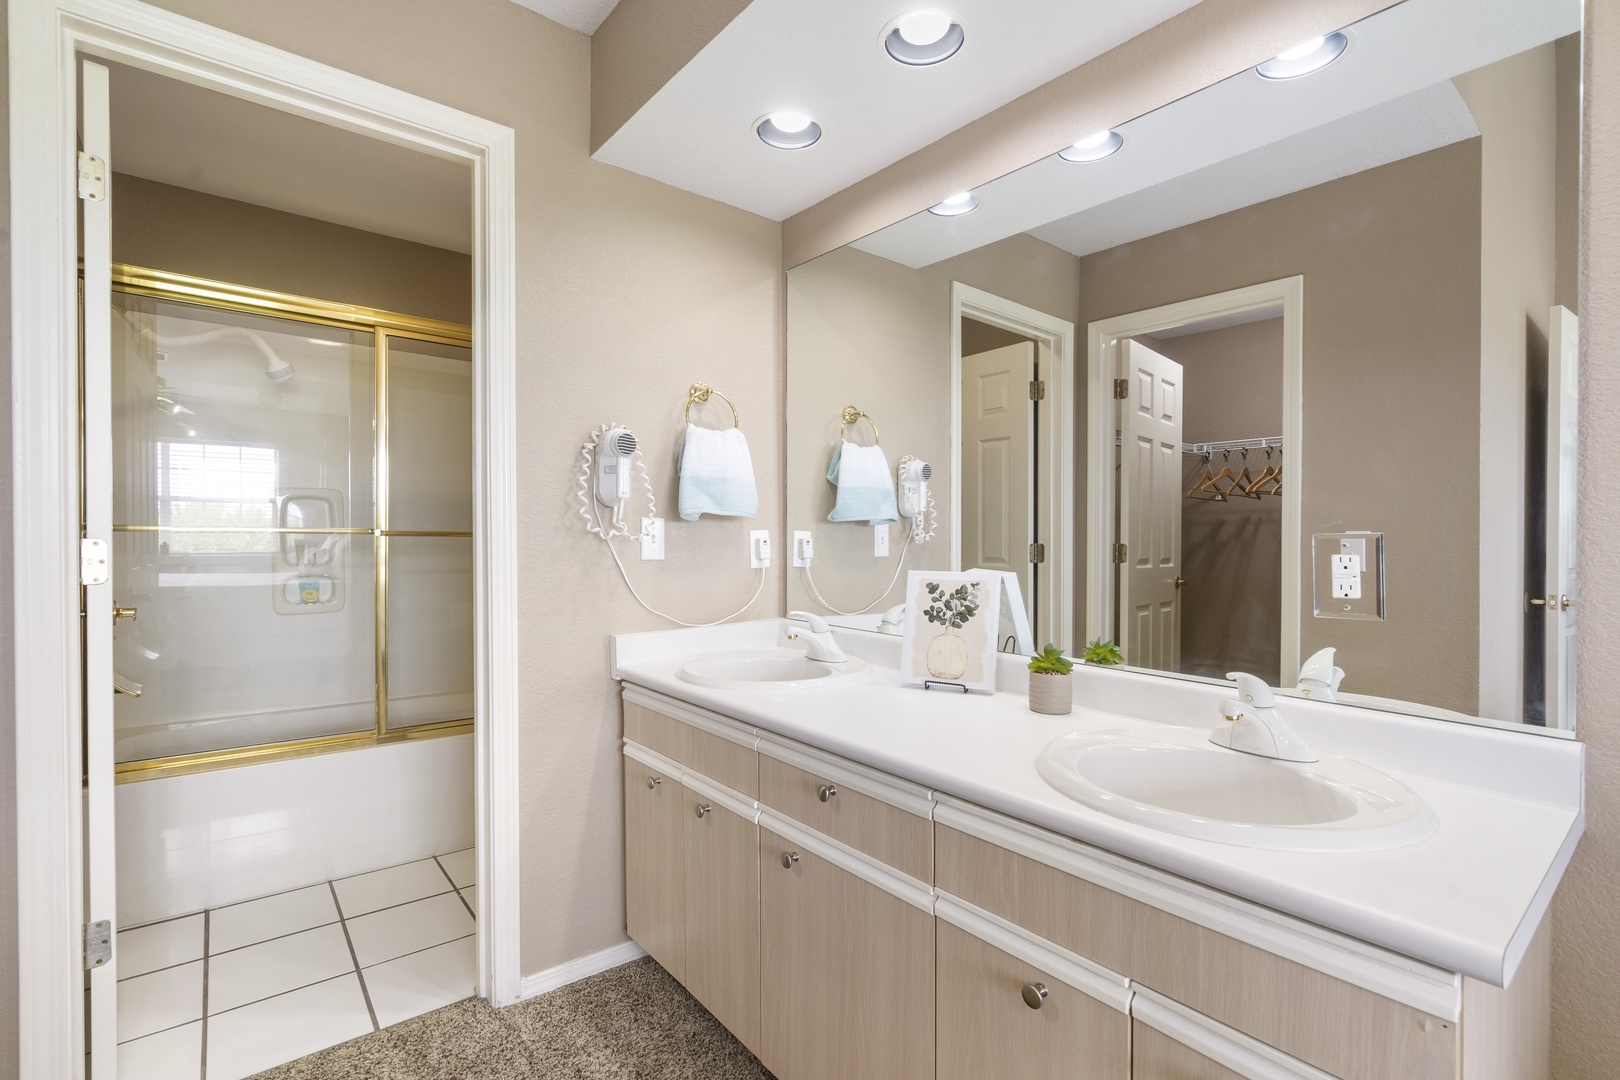 En-suite bathroom 4. After rolling out of your king bed, find yourself in the shower/tub combo to start your day off right